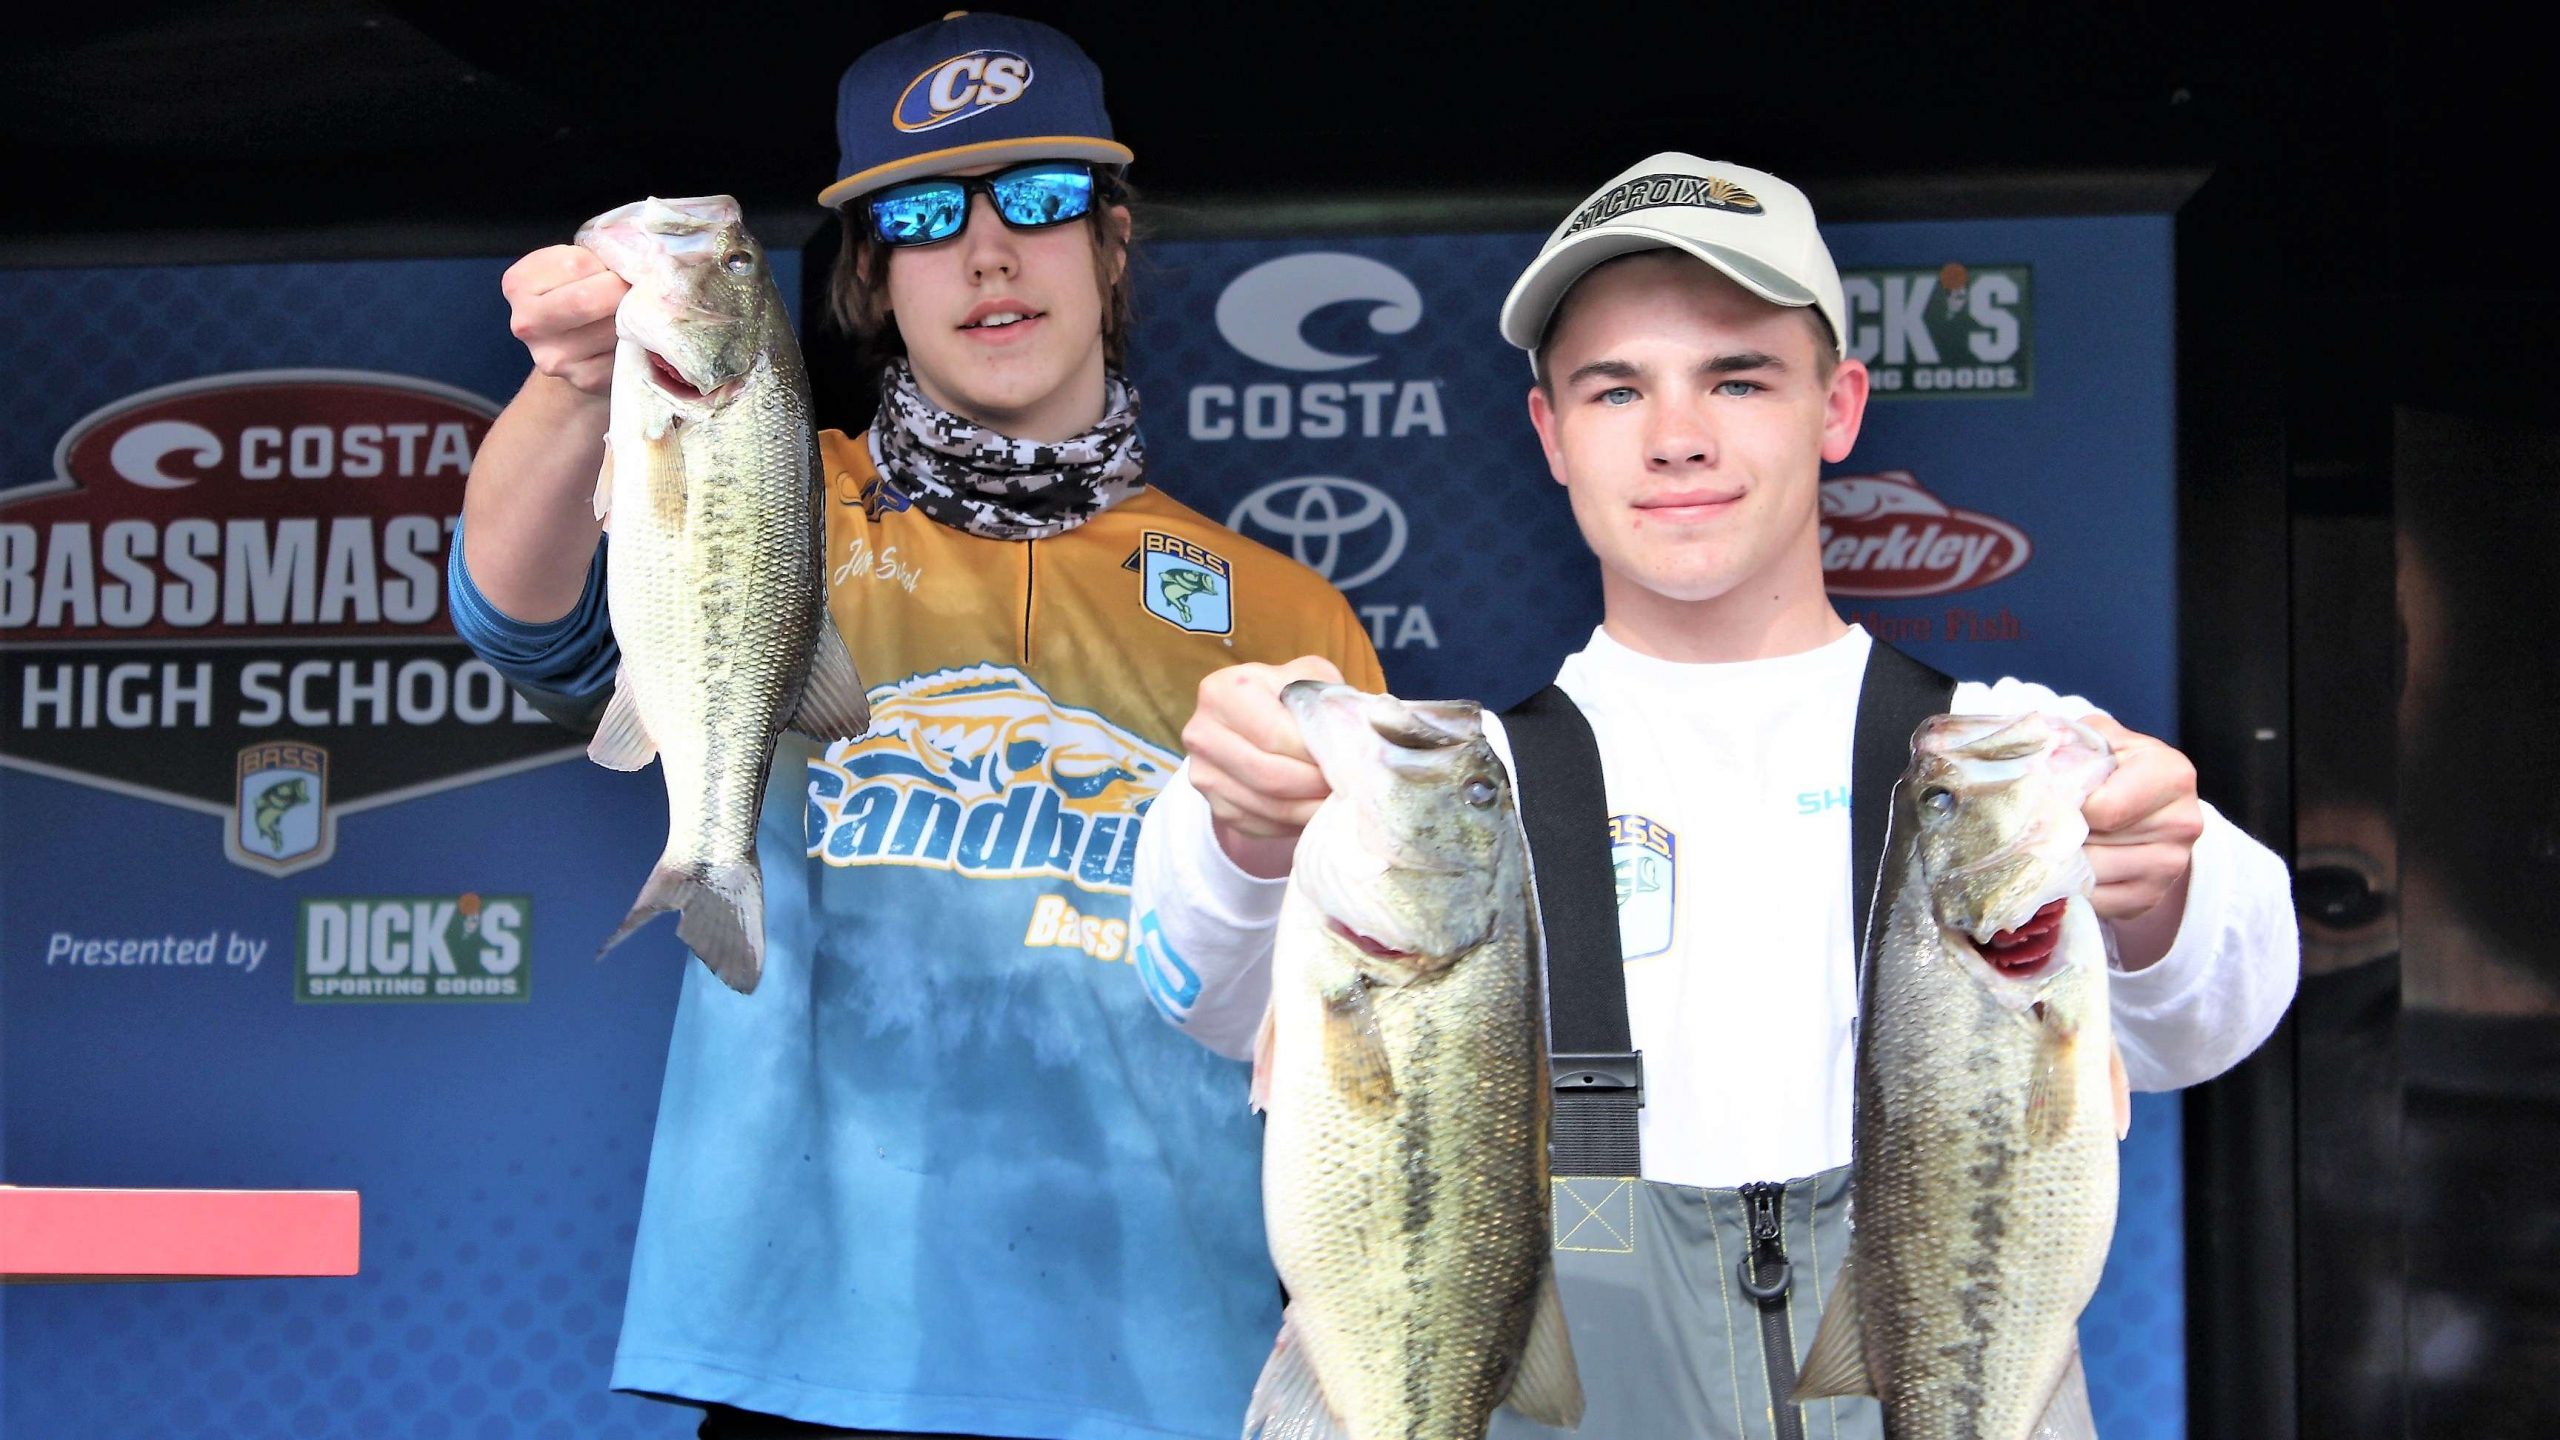 Daniel Neubaum and Josh Sokol finished 13th with a total of 10-4. They fish for Carl Sandburg High in Illinois. 